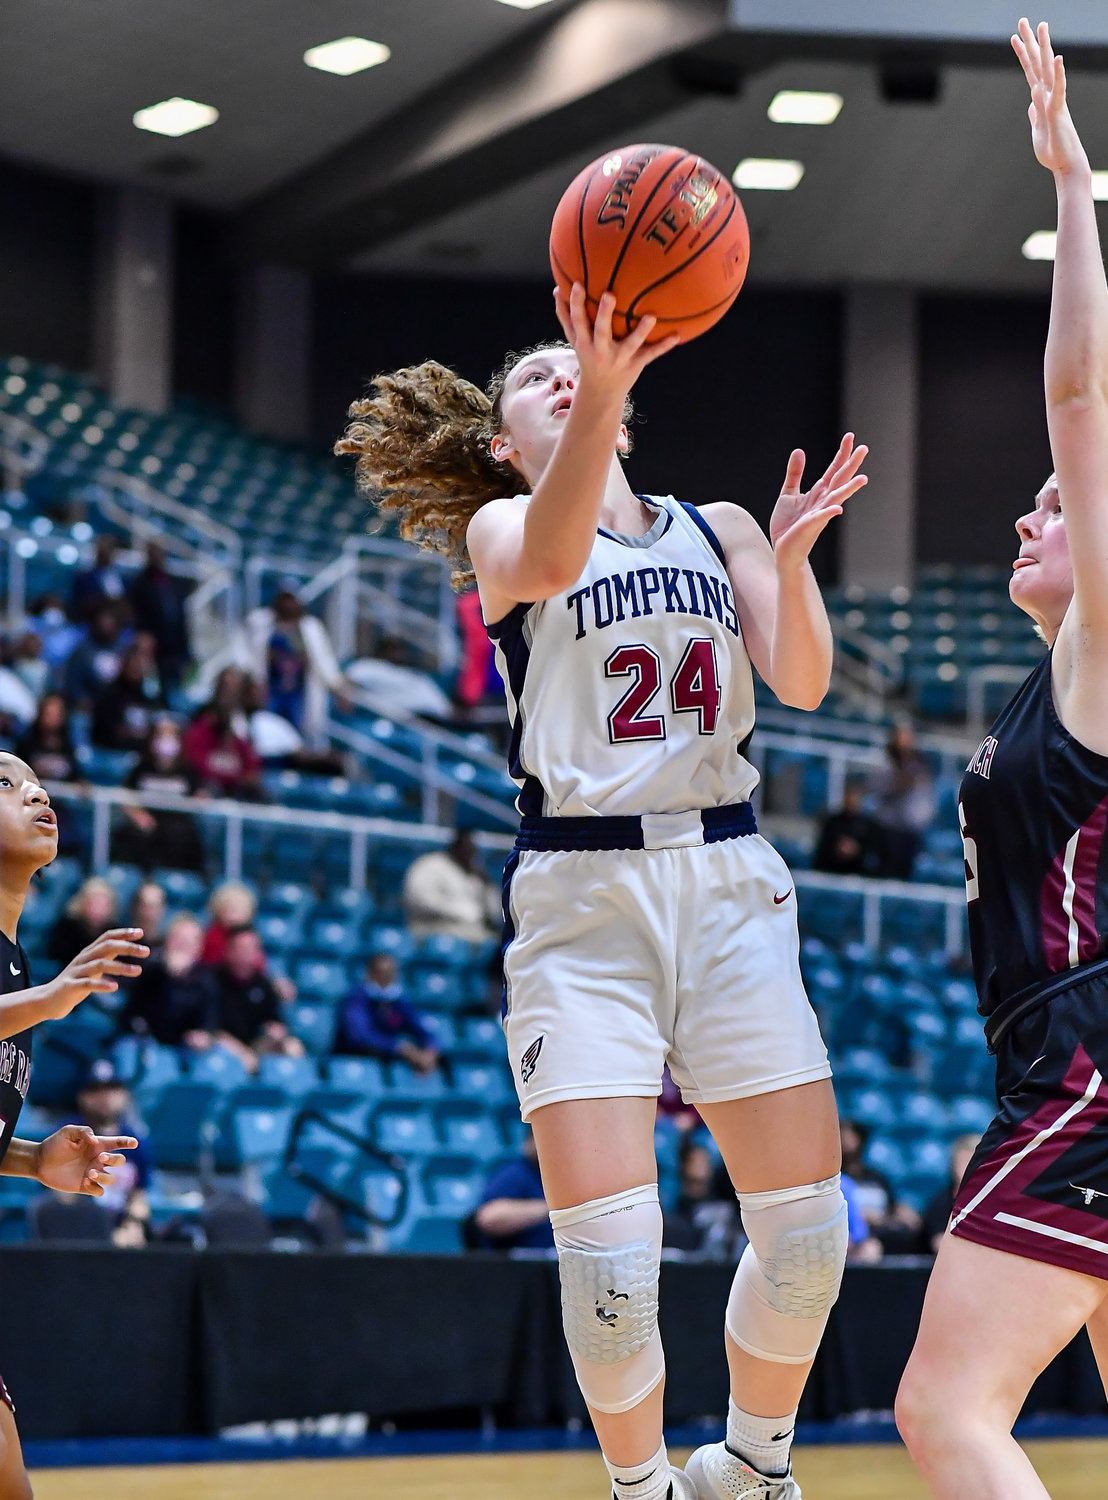 Katy Tx. Feb 15, 2022: Tompkins Gabby Panter #24 drives to the basket scoring for the Falcons during the Bi-District playoff, Tompkins vs George Ranch. (Photo by Mark Goodman / Katy Times)